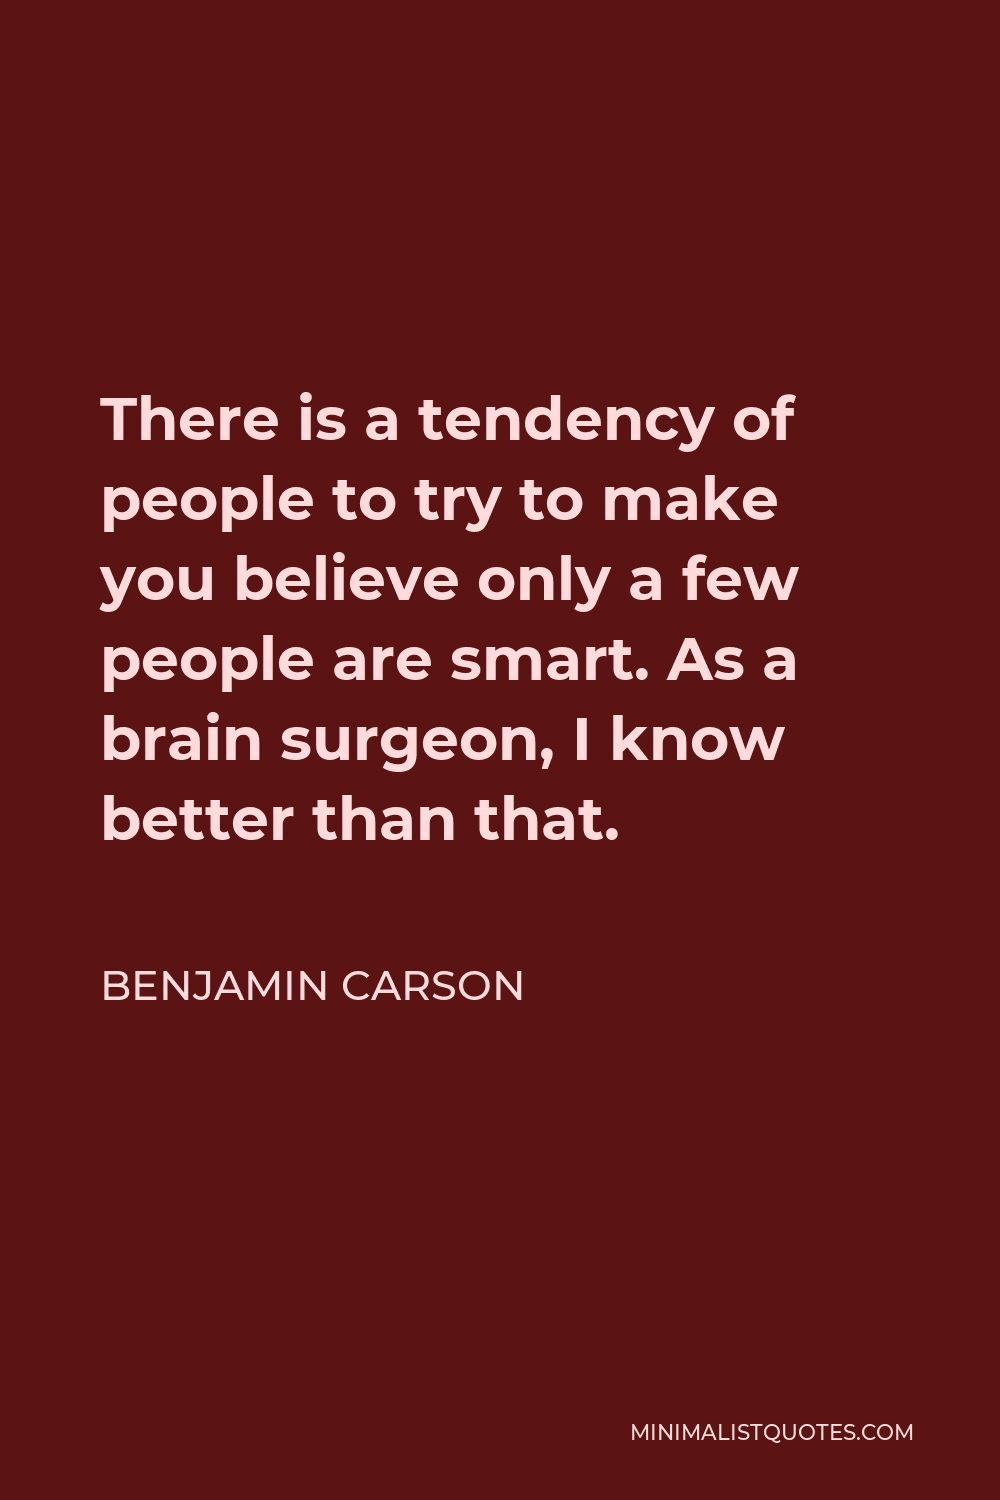 Ben Carson Quote - There is a tendency of people to try to make you believe only a few people are smart. As a brain surgeon, I know better than that.